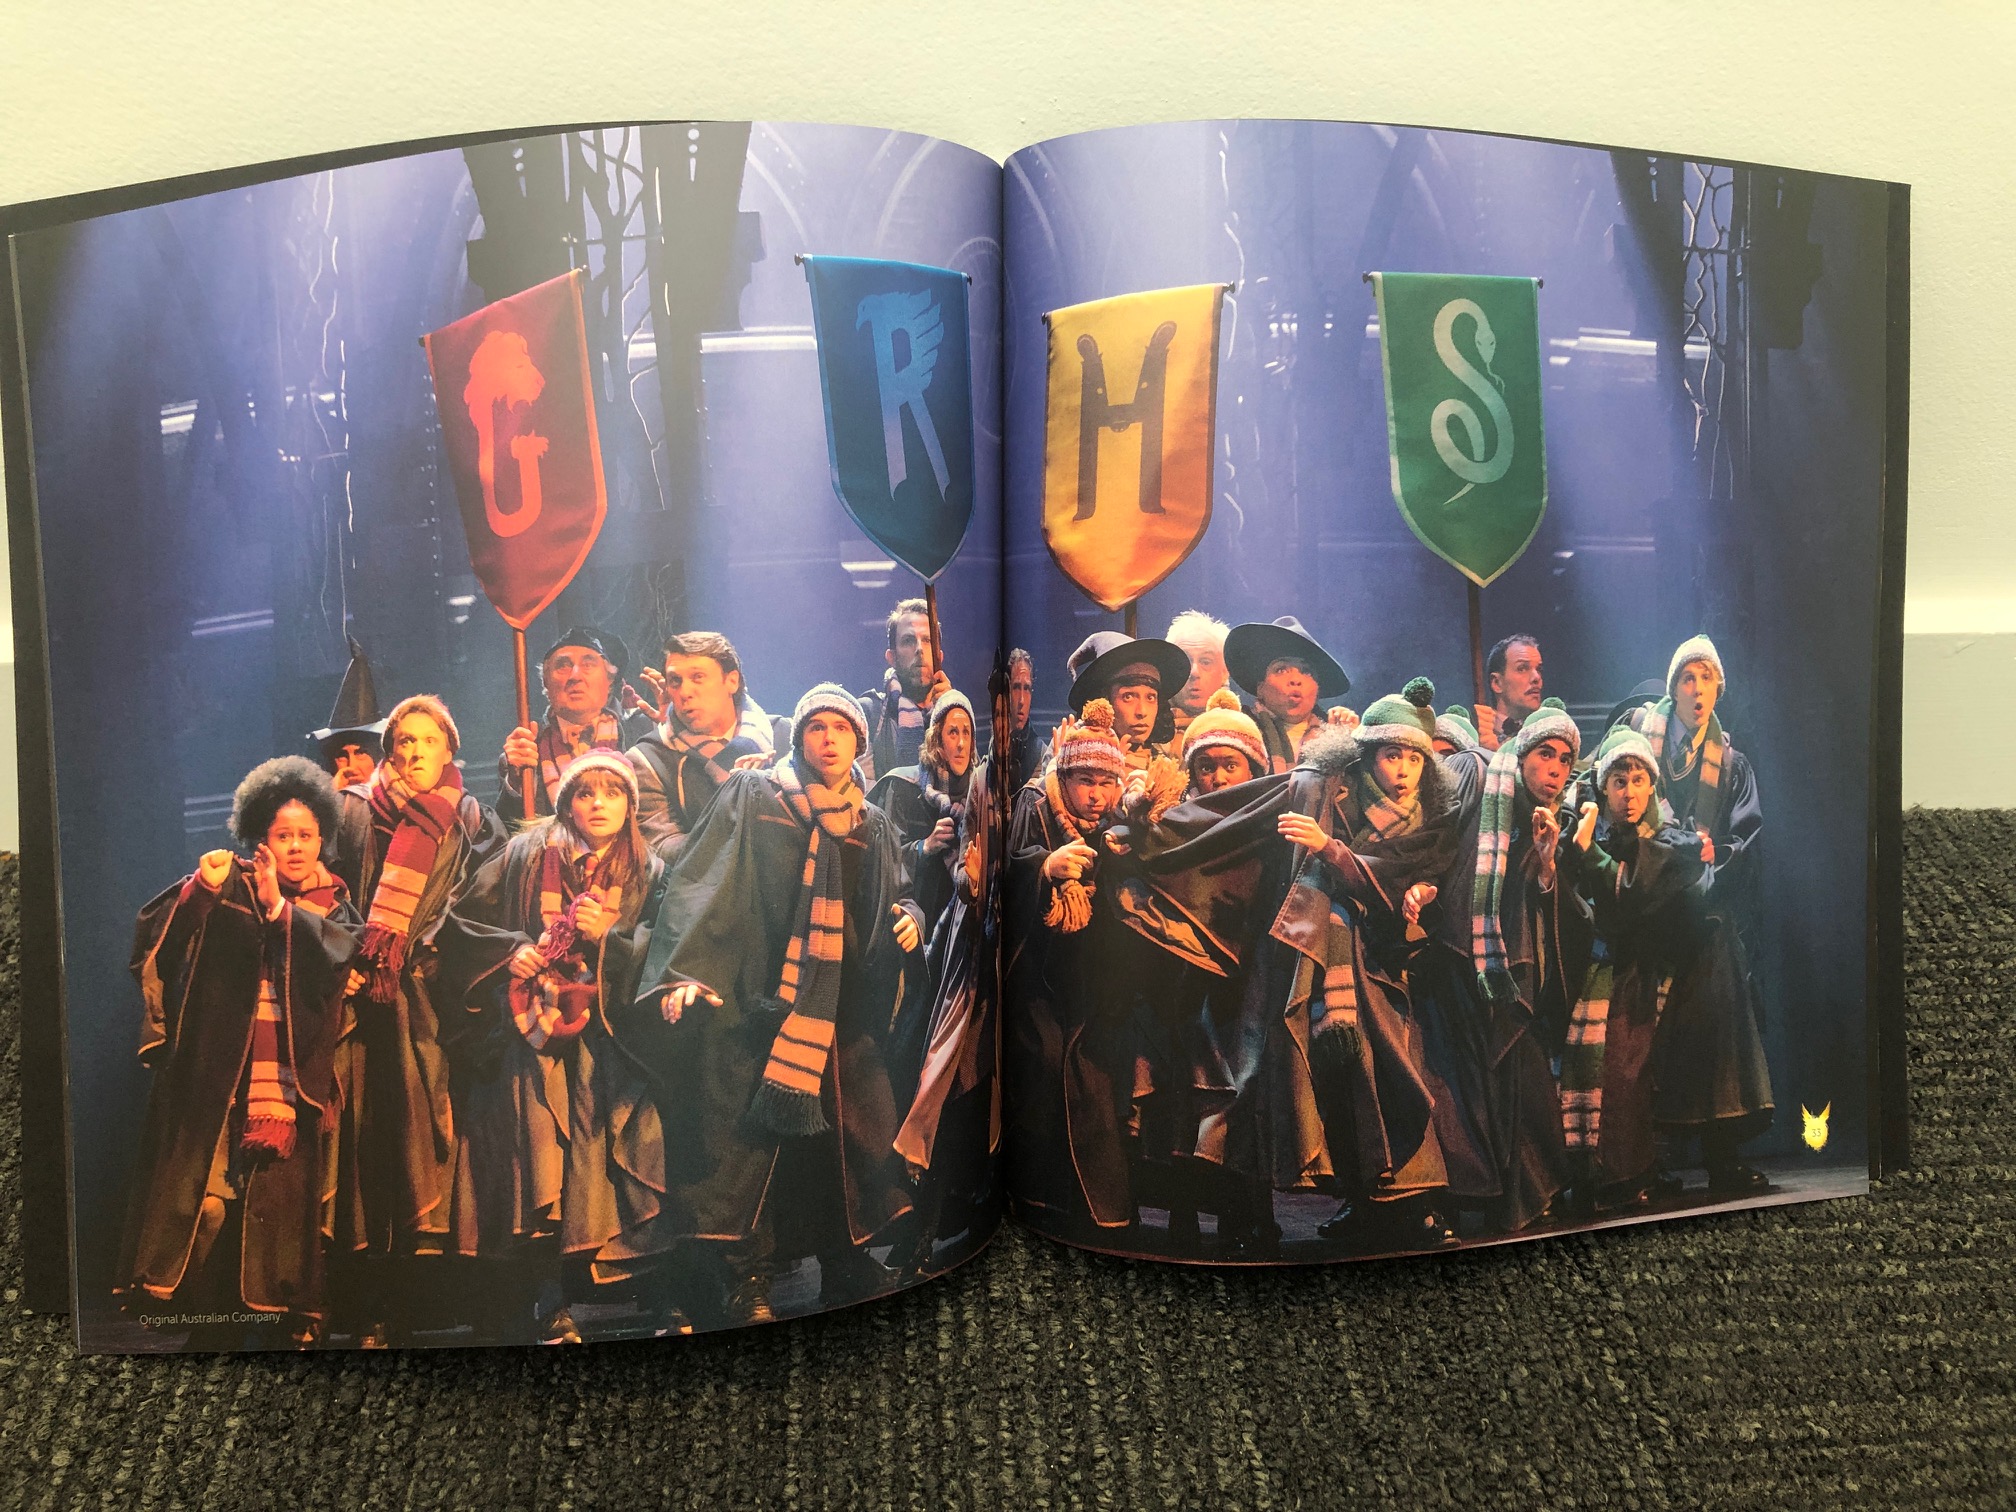 Inside spread, “Harry Potter and the Cursed Child” souvenir brochure and programs from the Melbourne, Australia, premiere on February 22, 2019